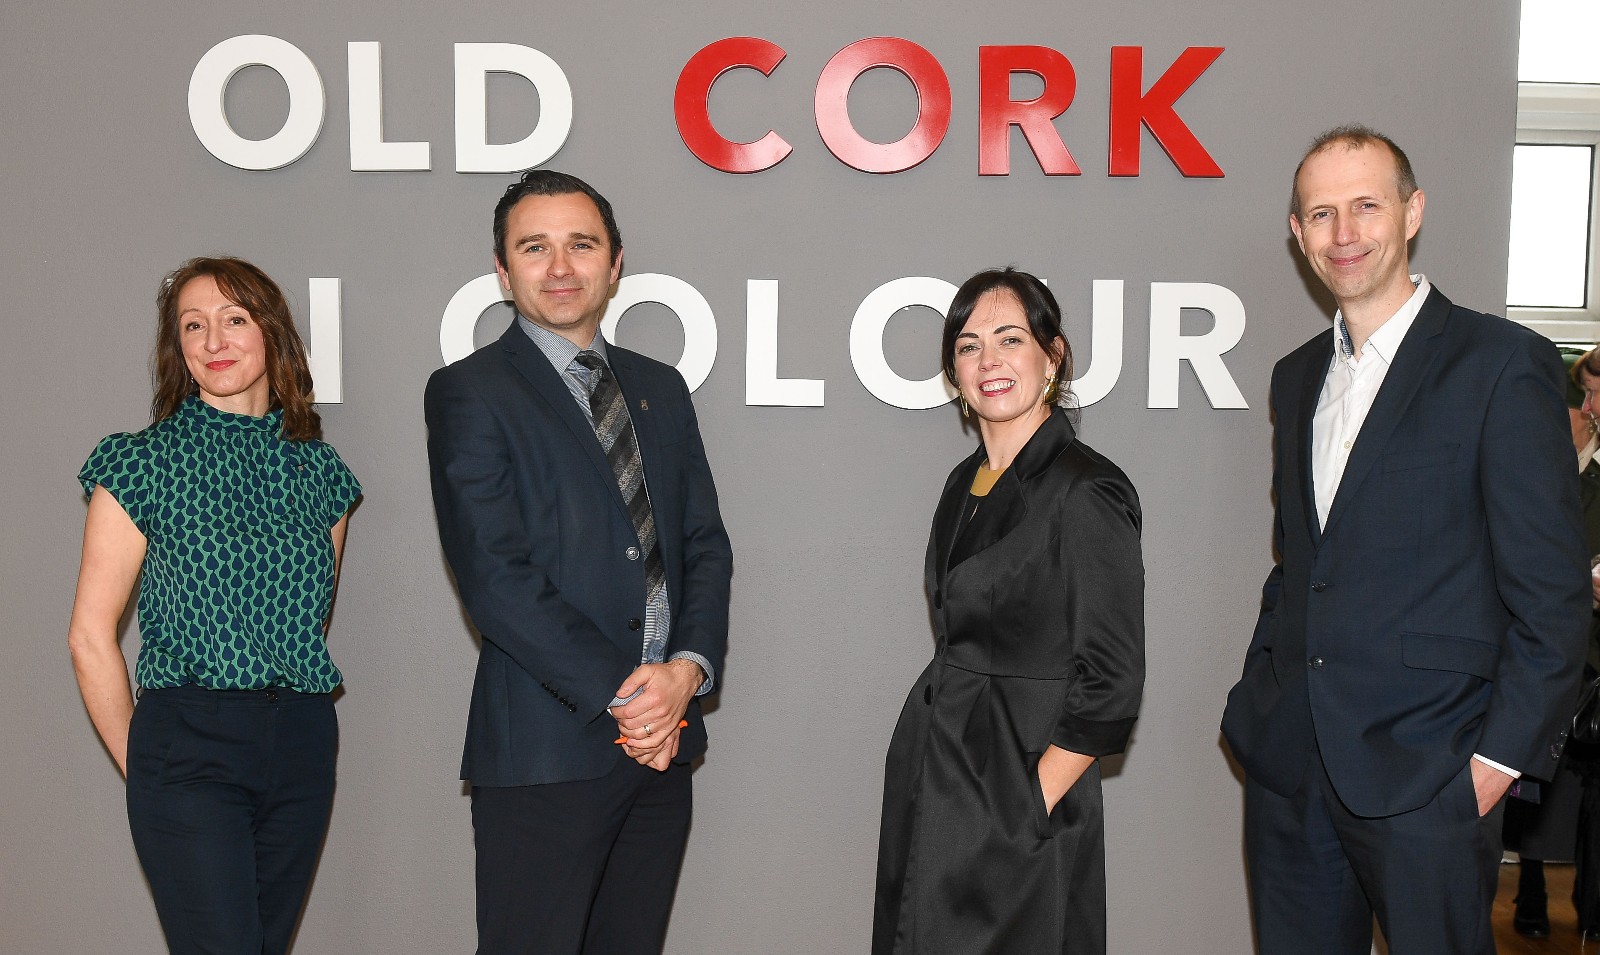 From left, Dorota Gubbins curator and John Crotty general manager, both Spike Island and authors Dr Sarah-Anne Buckley and Professor John Breslin, both NUI Galway, at the official opening of the exhibition 'Old Cork in Colour' on 12 April 2022. Photo: David Keane